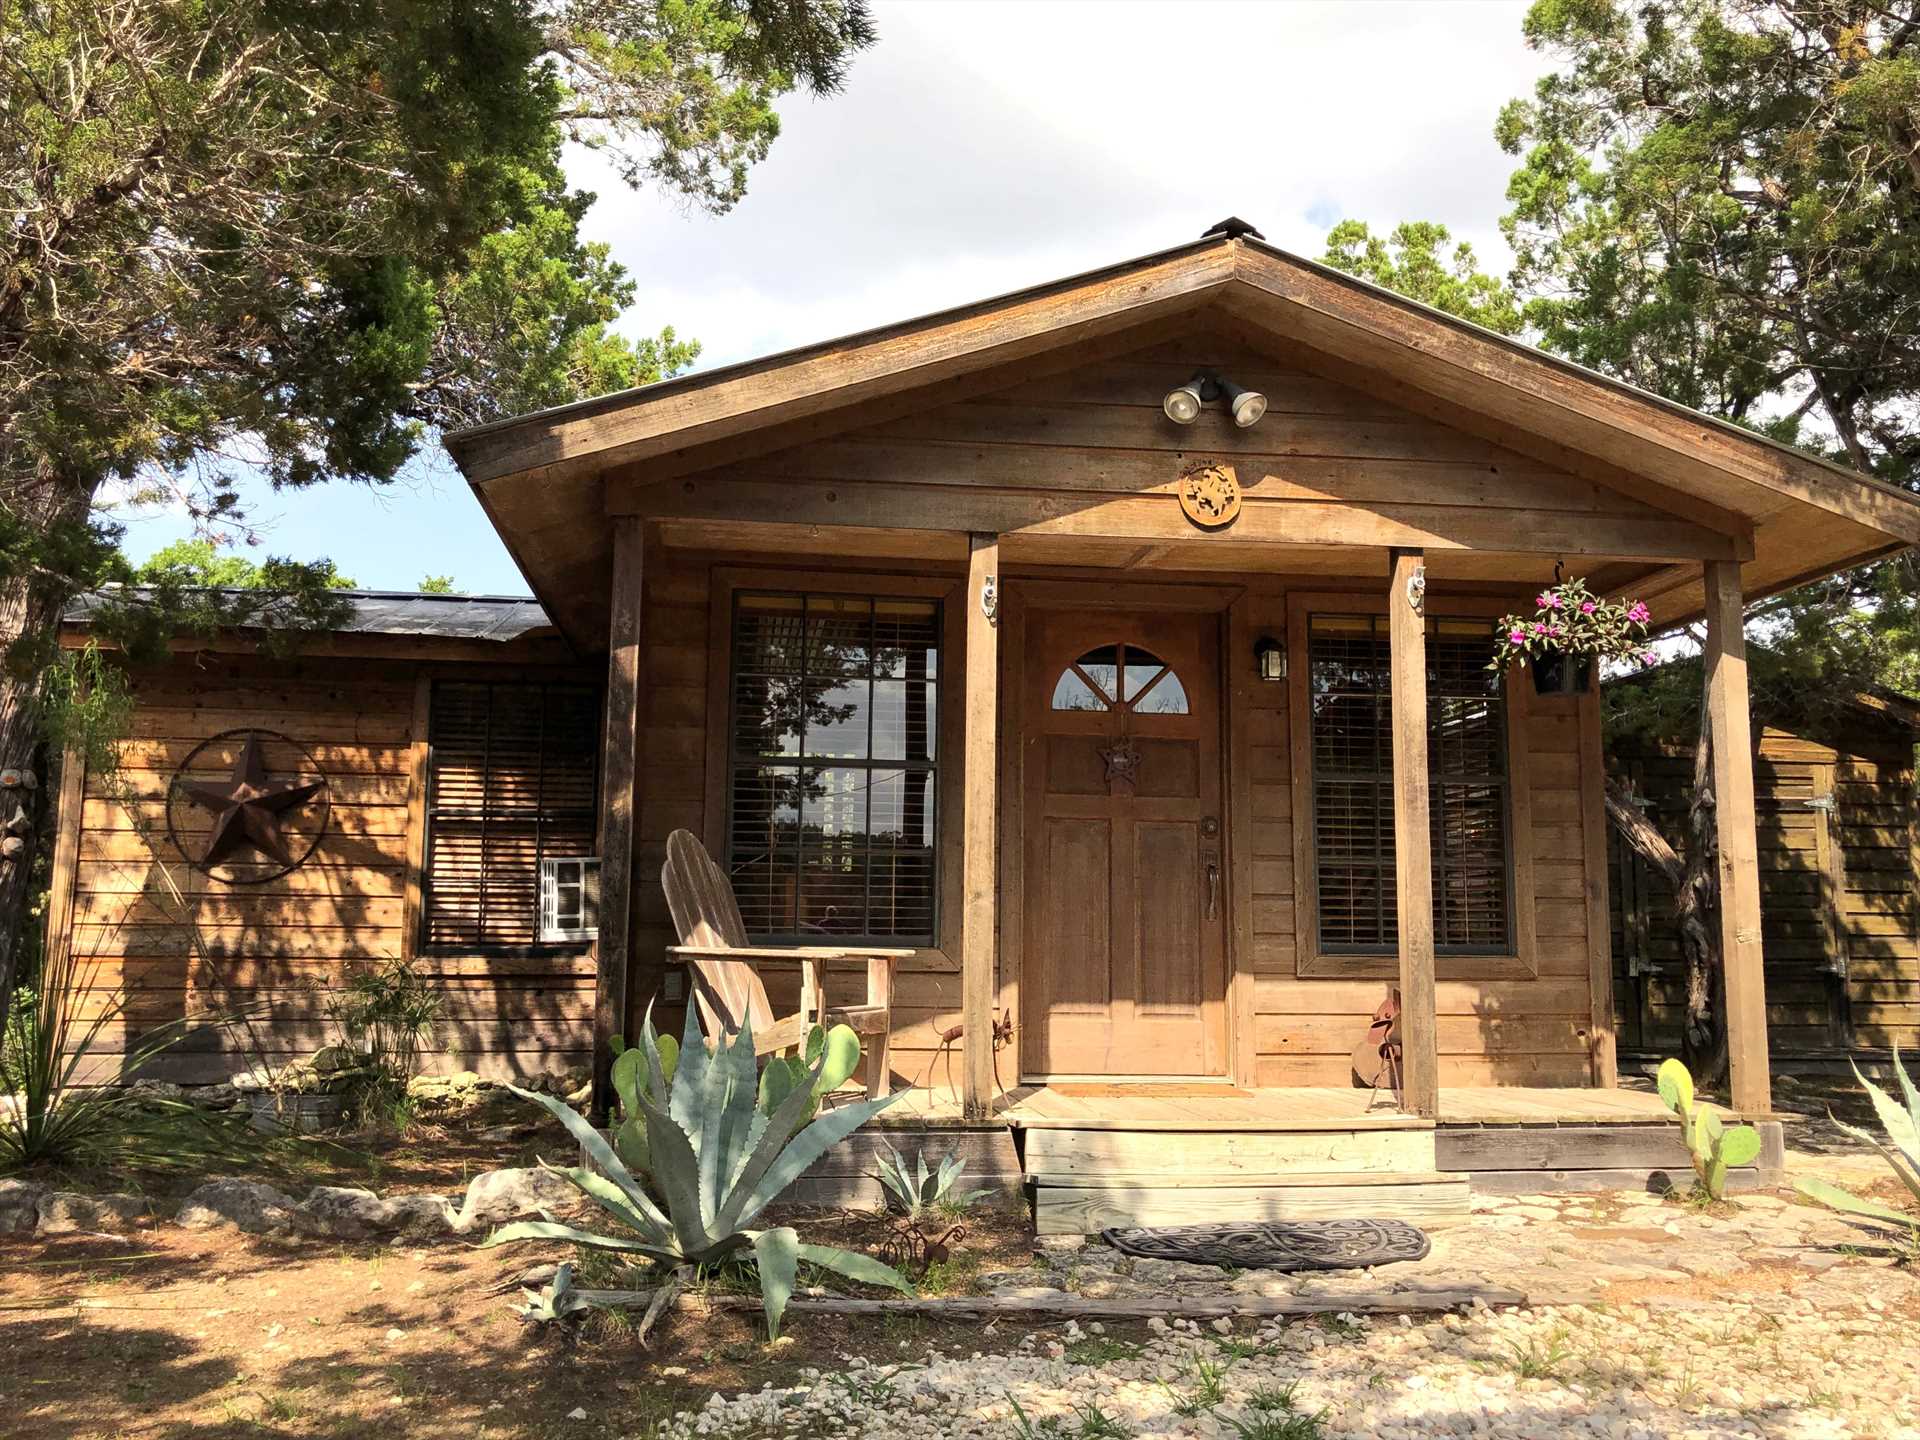                                                 With a handy kitchenette, charcoal grill, TV with 40 channels, fire pit, and additional comforts, the Love Shack is a wonderful getaway within a getaway at the Retreat!